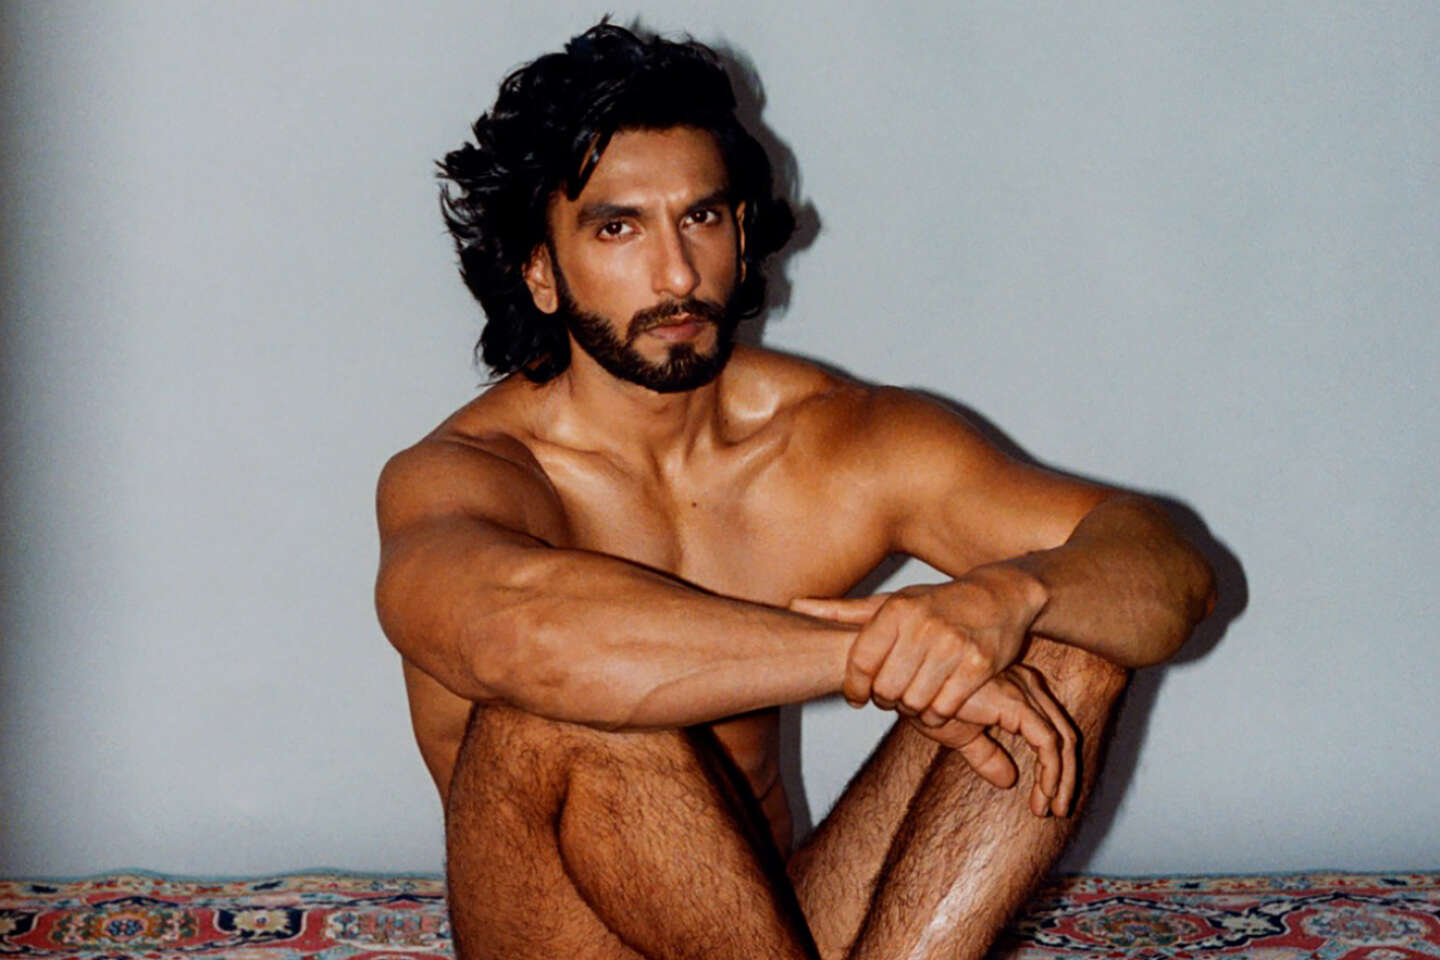 Bollywood Actors Girls Nude - Nude photos of a Bollywood actor are setting India abuzz